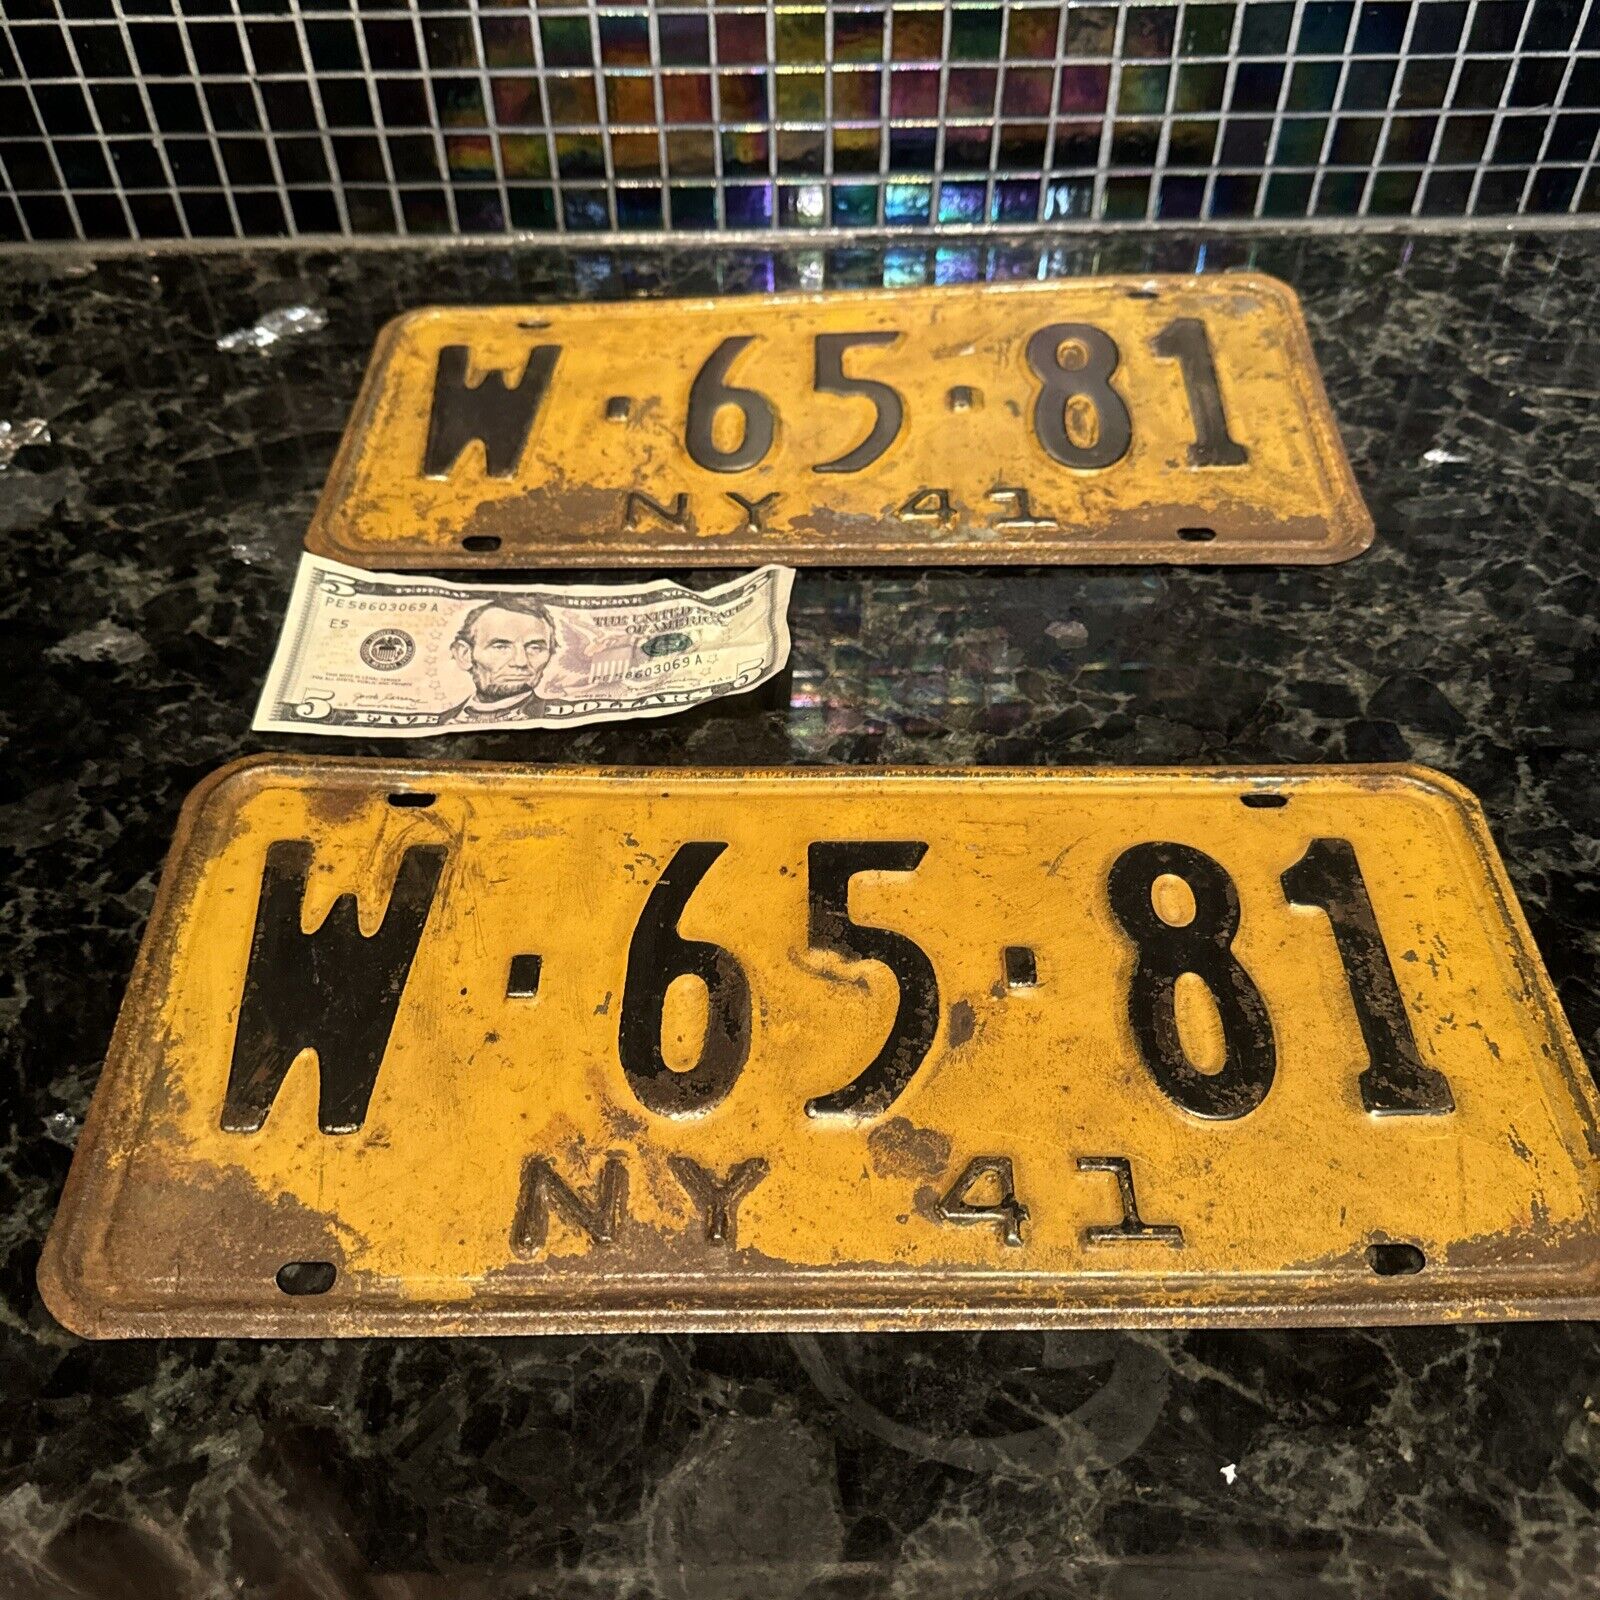 1941 New York License Plates Pair NY 41 W-65-81  Matched Set Good Condition